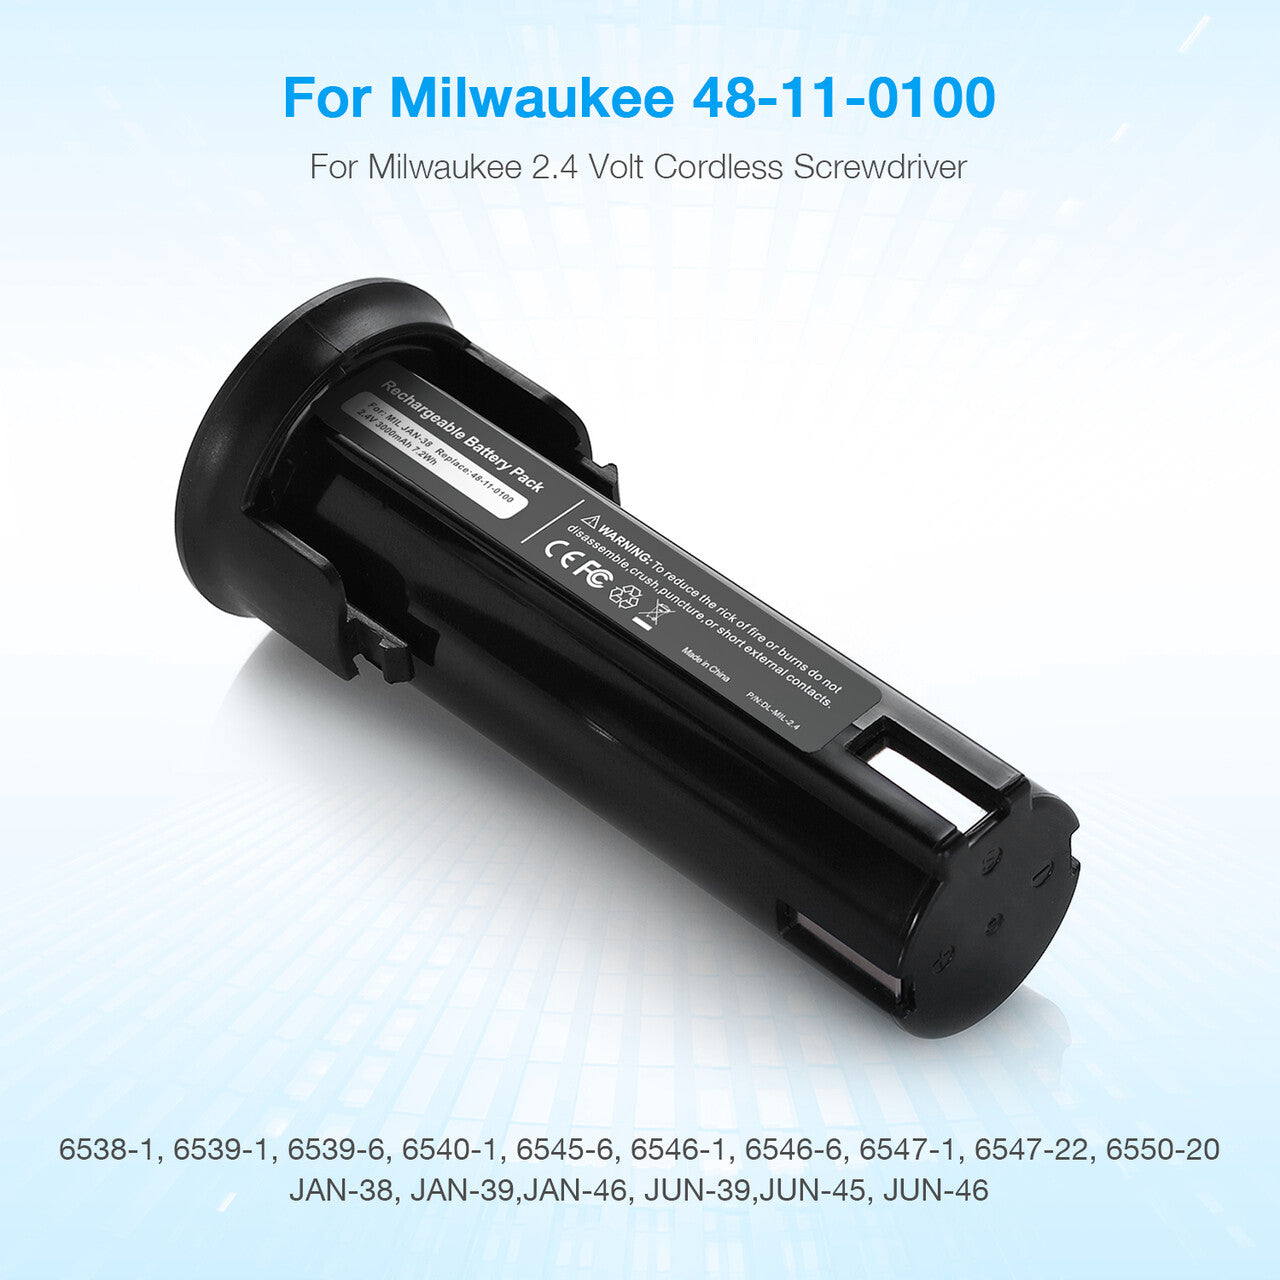 3.0Ah 2.4V NICD Battery 48-11-0100 for MILWAUKEE Cordless Screwdriver